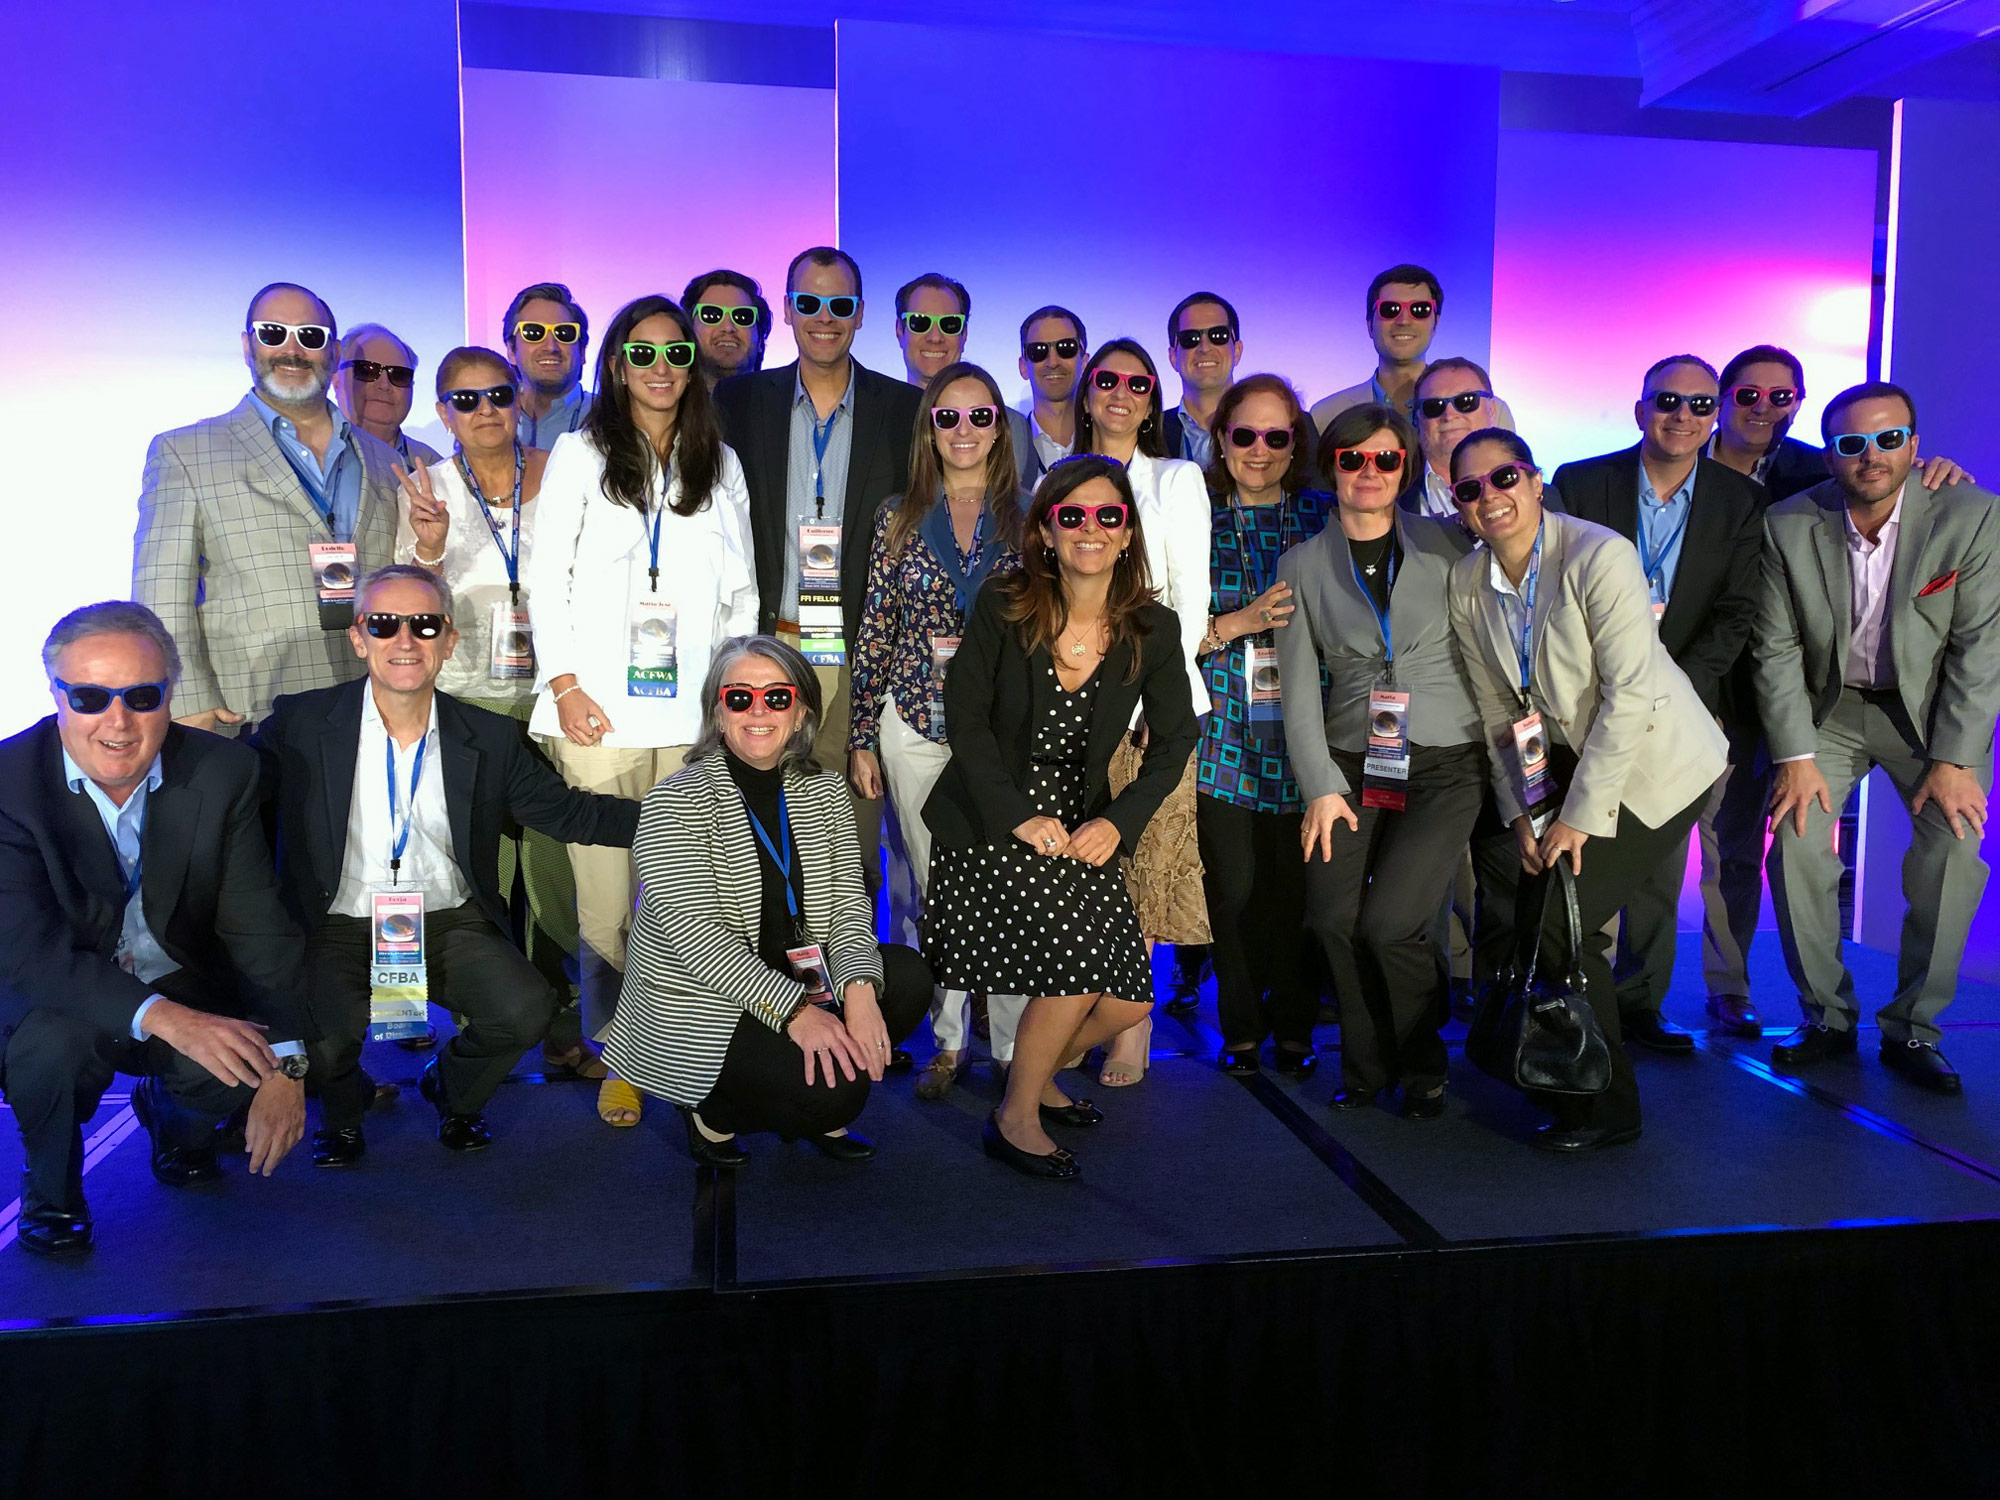 a large group photo of business people, smiling together, all wearing sunglasses